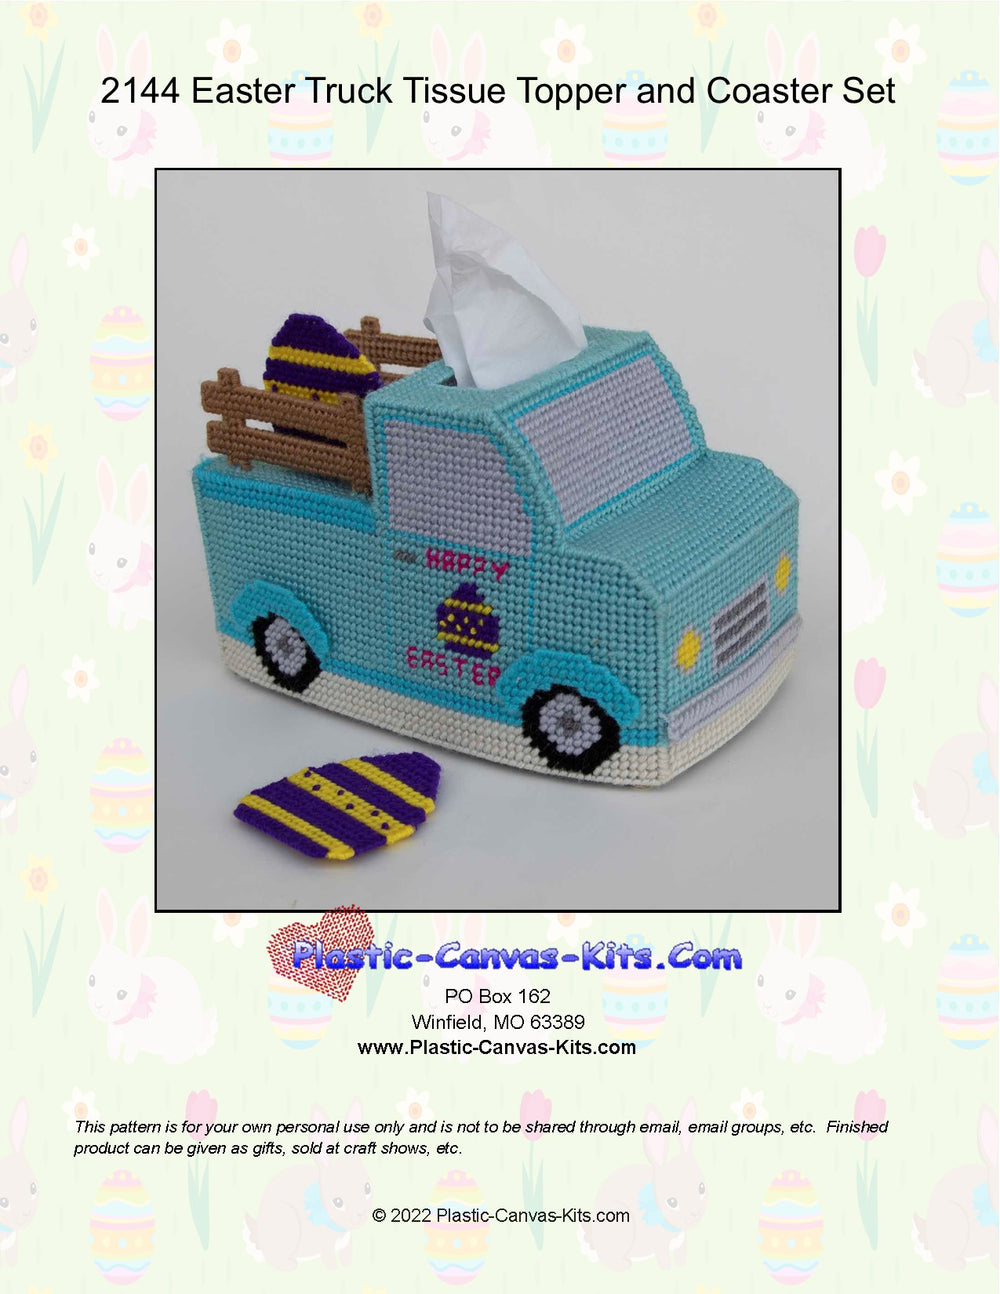 Easter Truck Tissue Topper and Coaster Set